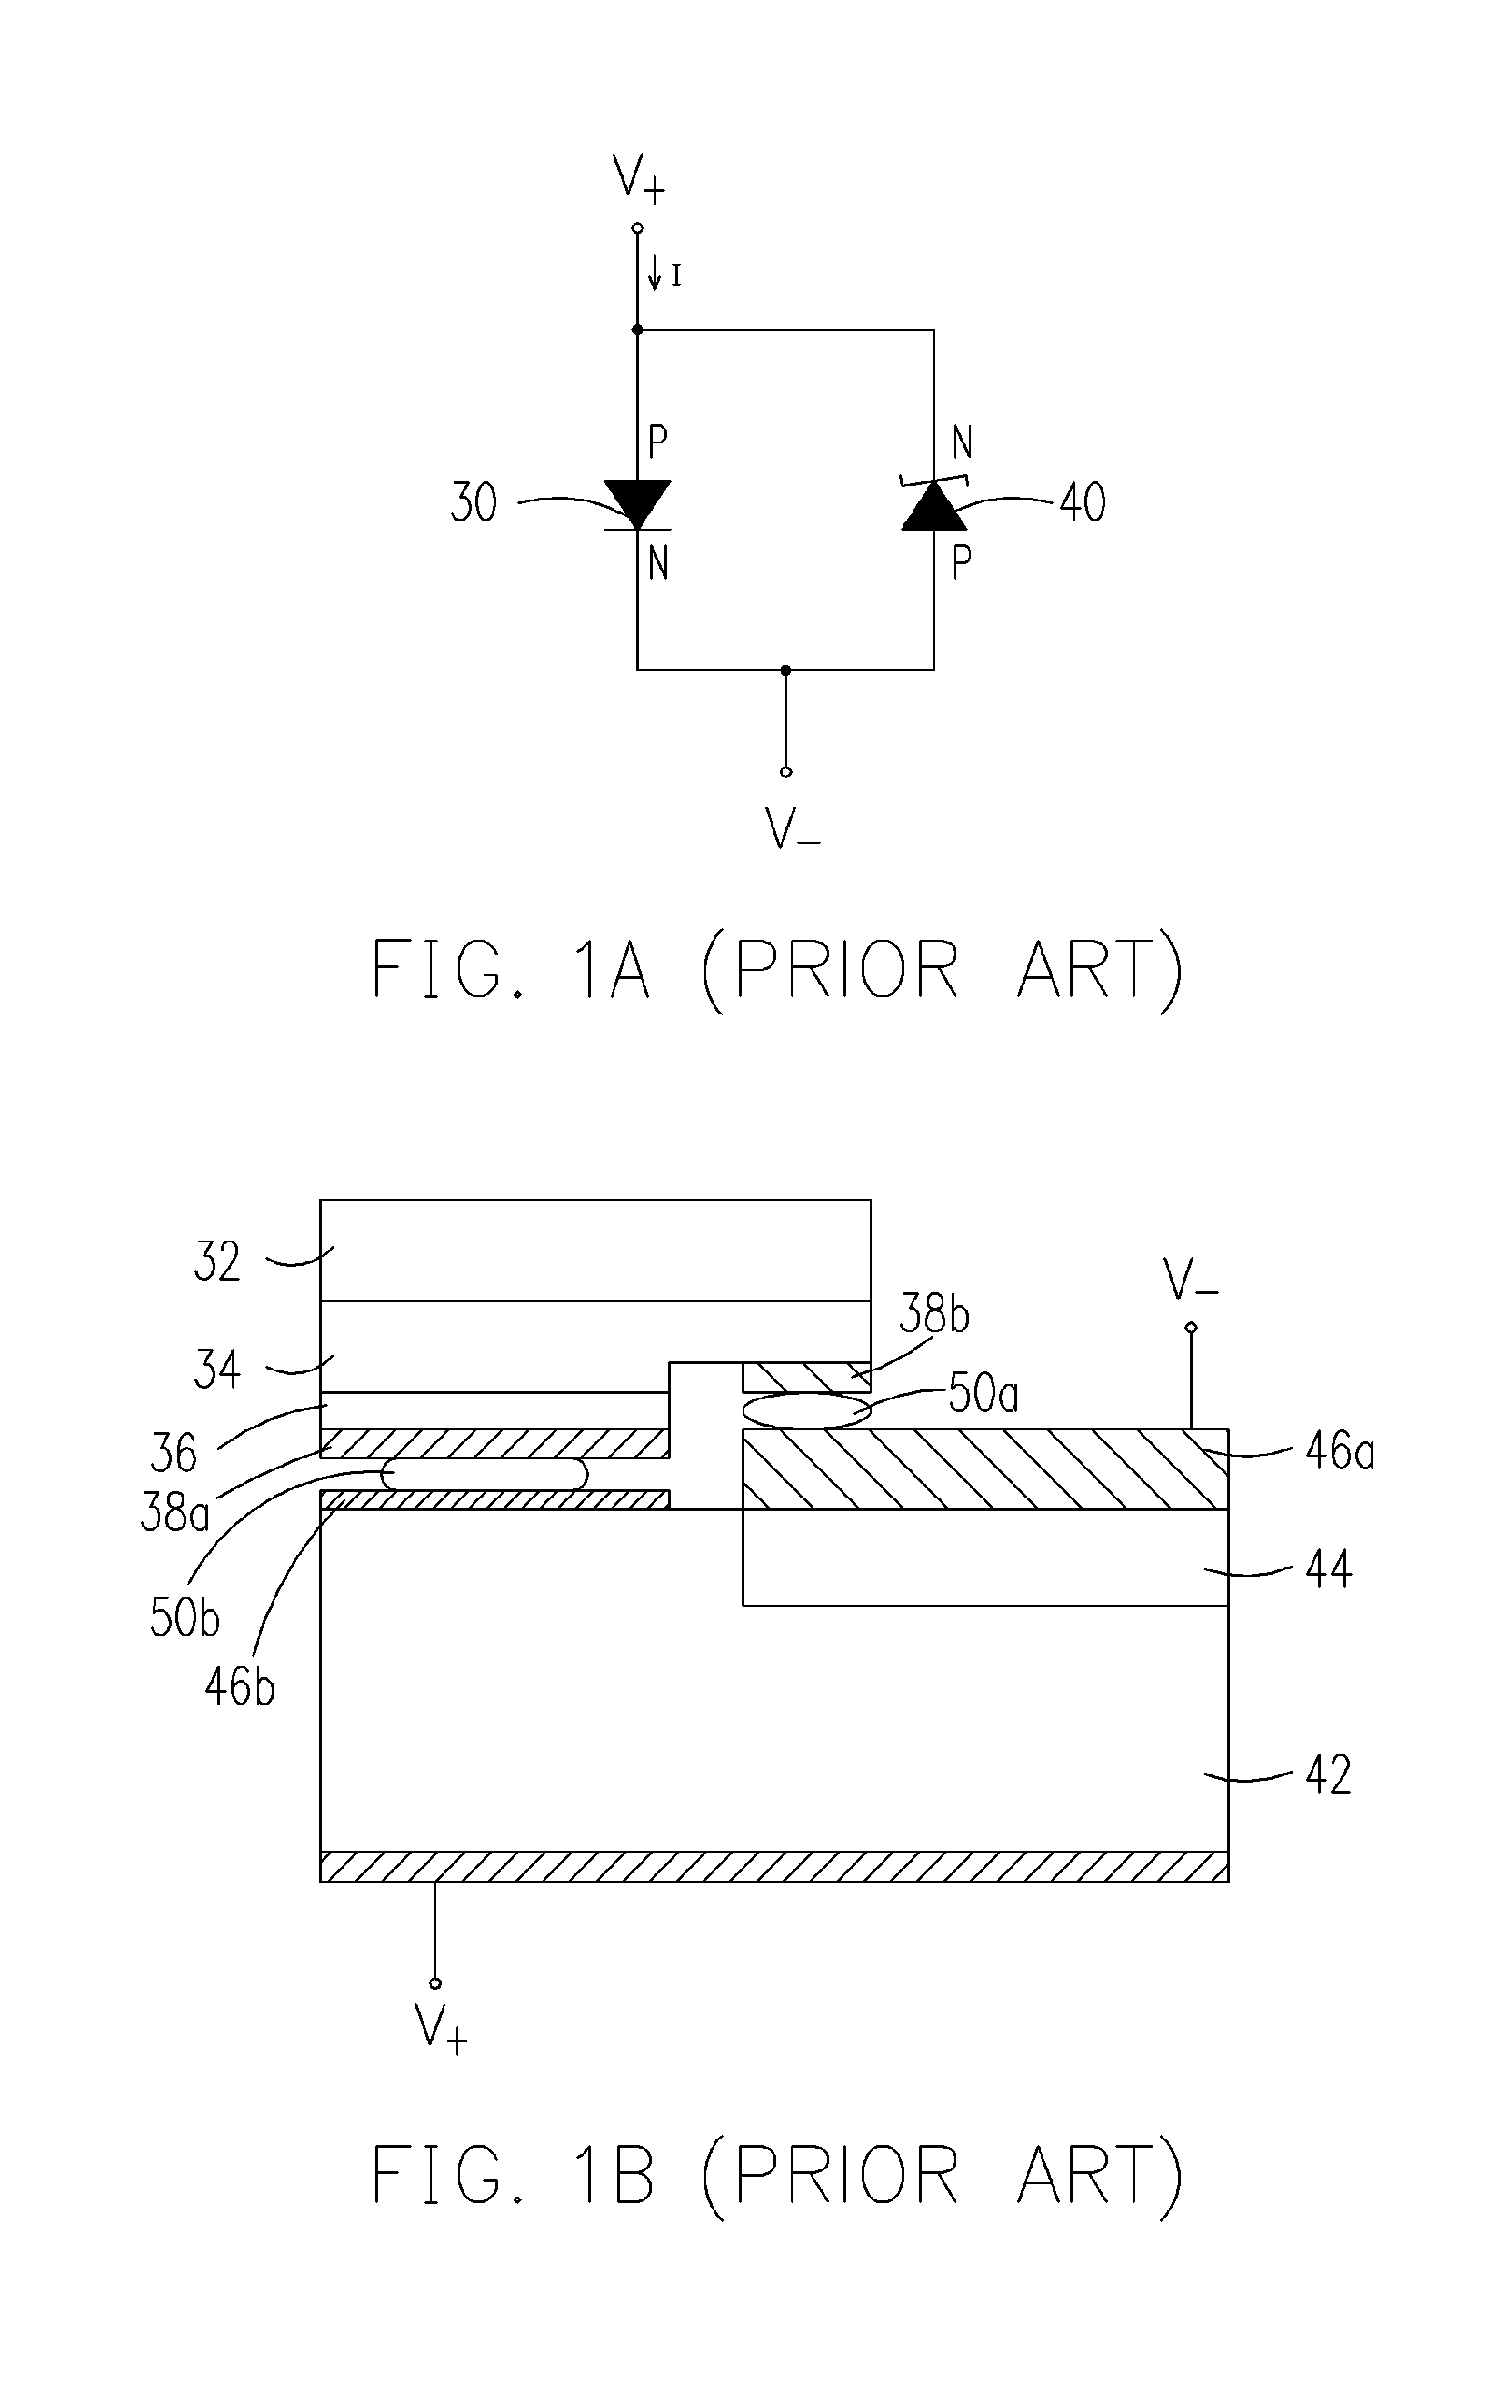 Light-emitting diode structure with electrostatic discharge protection